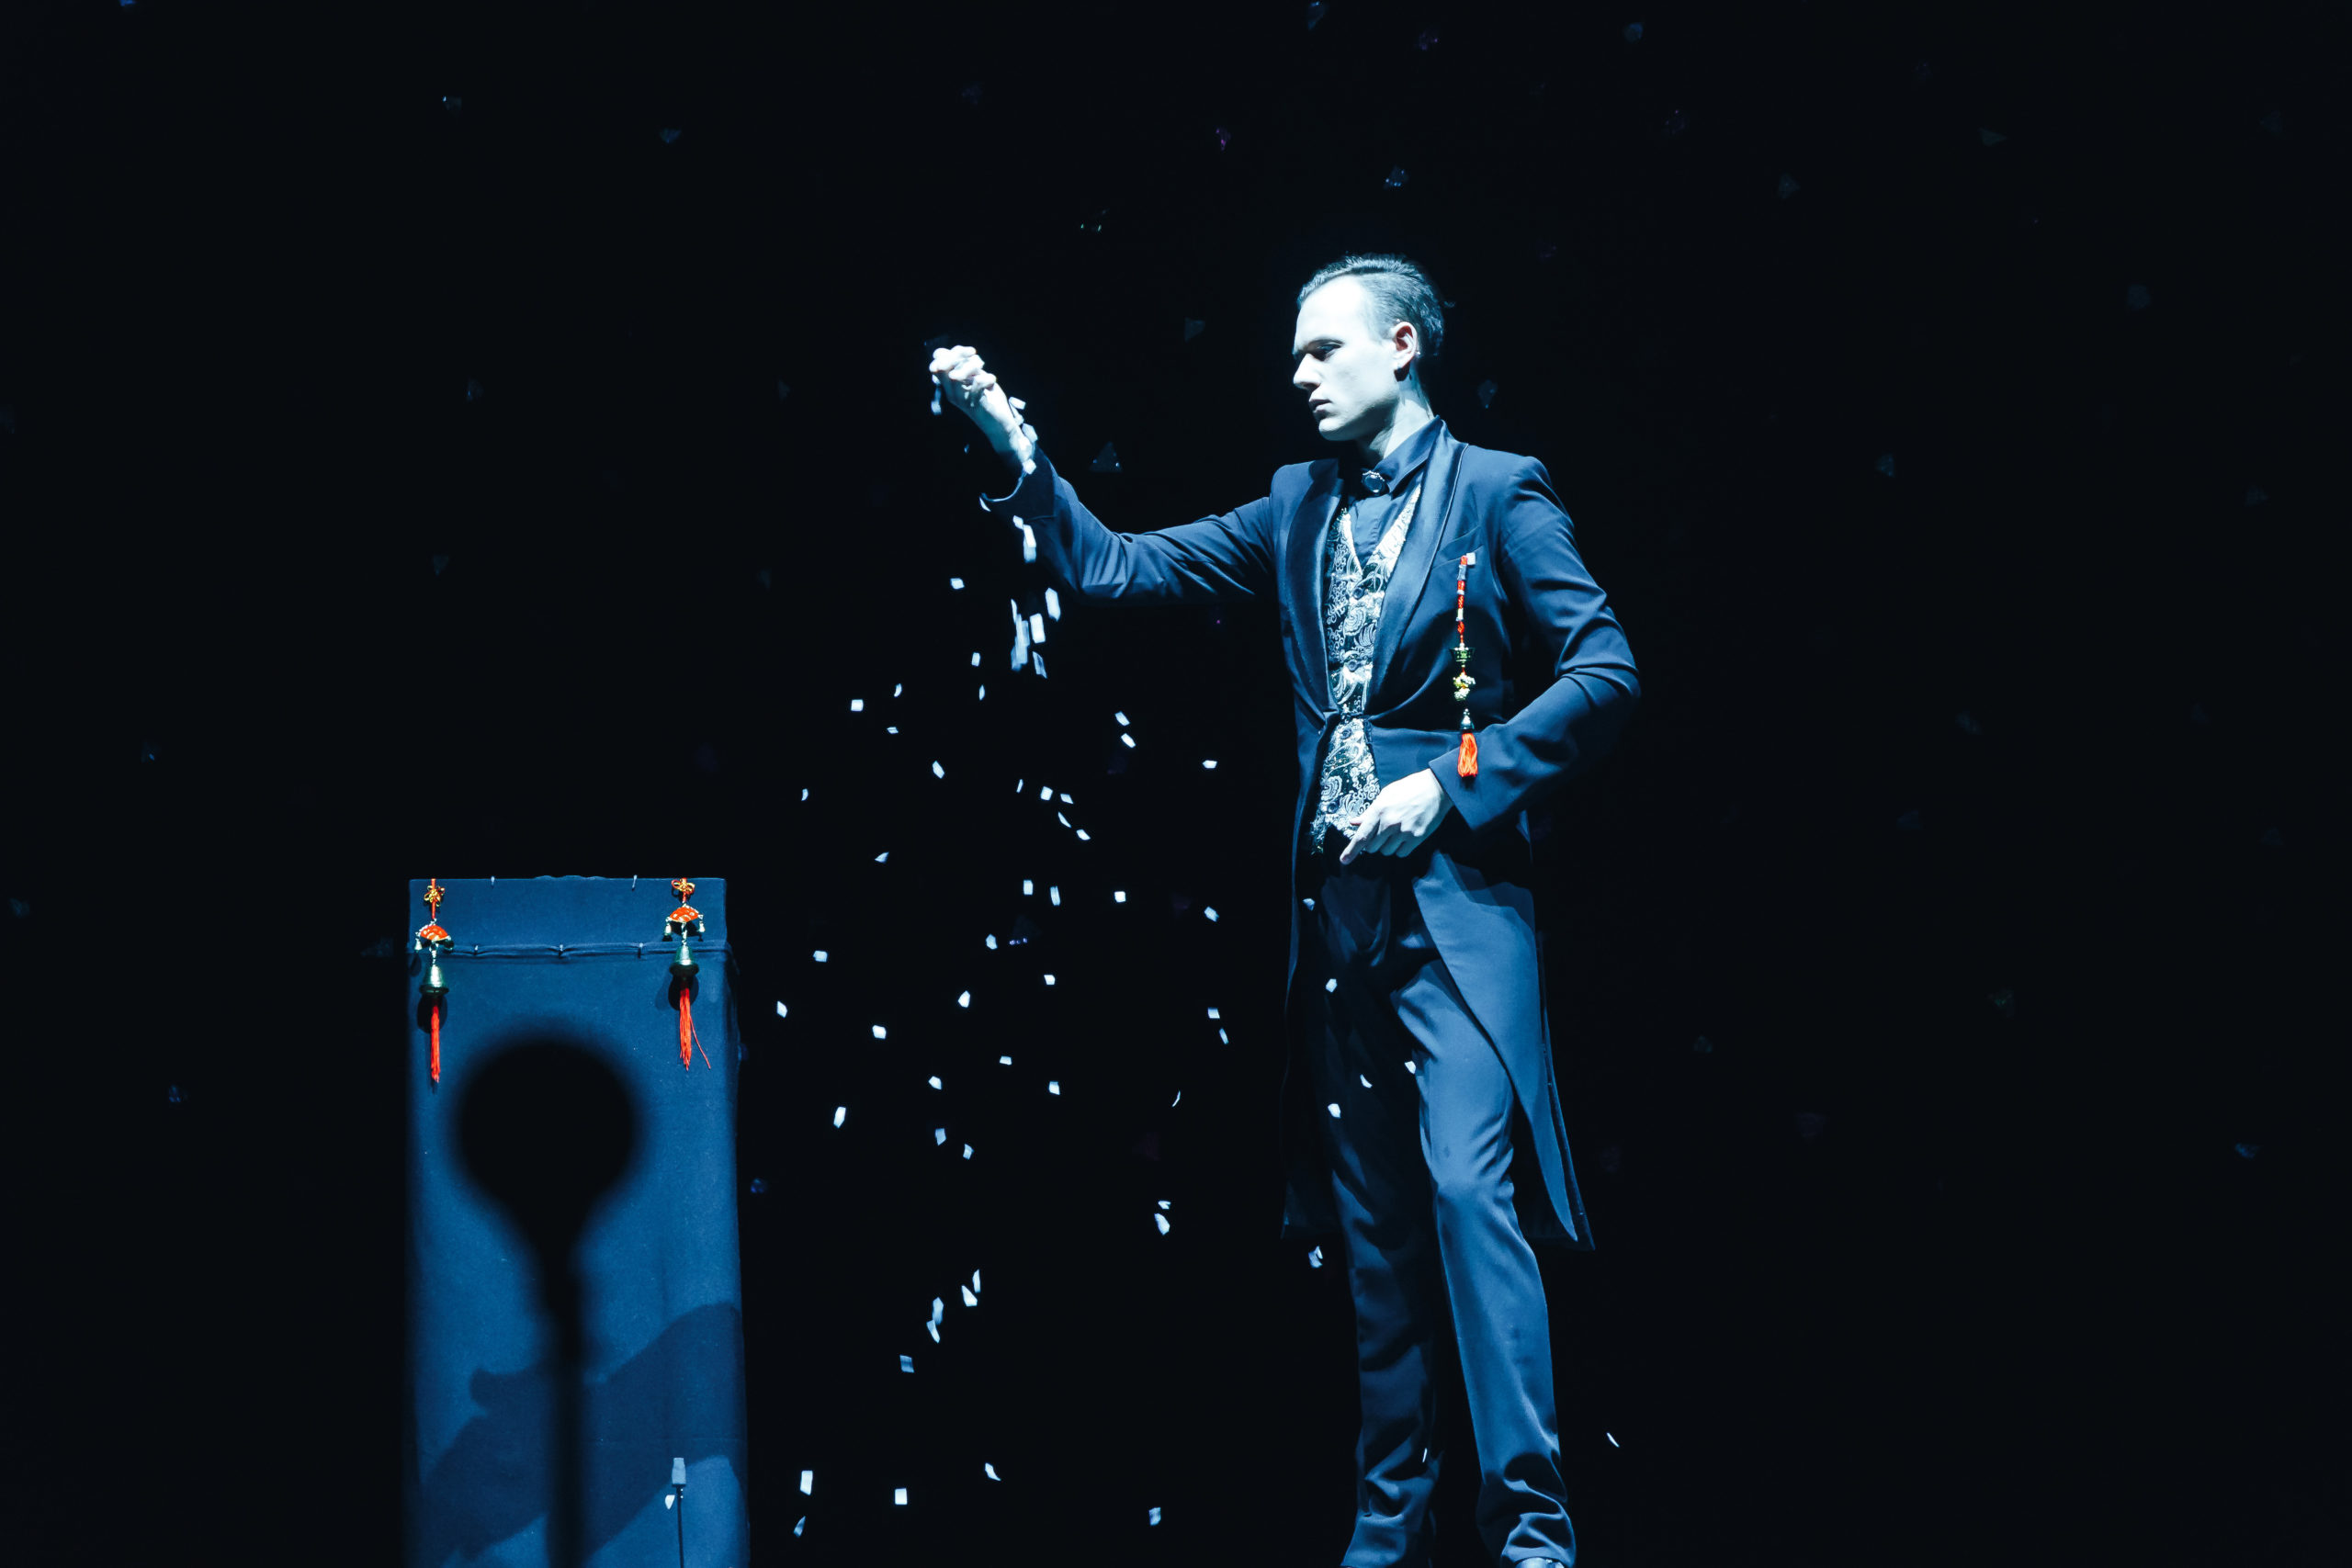 Magician performing a trick on stage